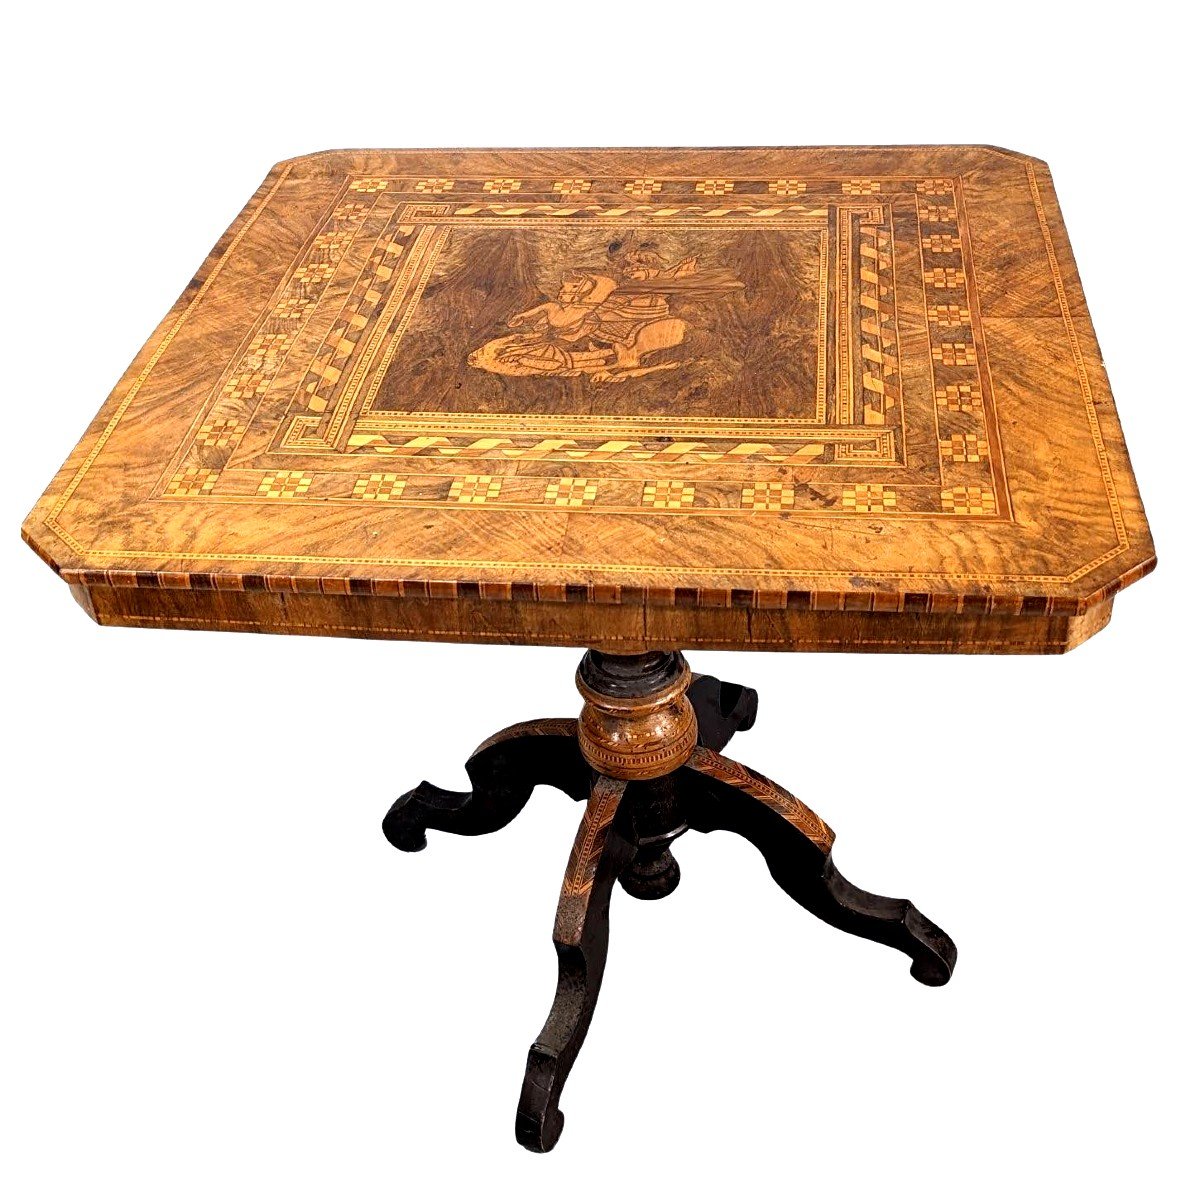 Italian Sorrento Pedestal Table Richly Inlaid Decorated With Saint George Slaying The Dragon